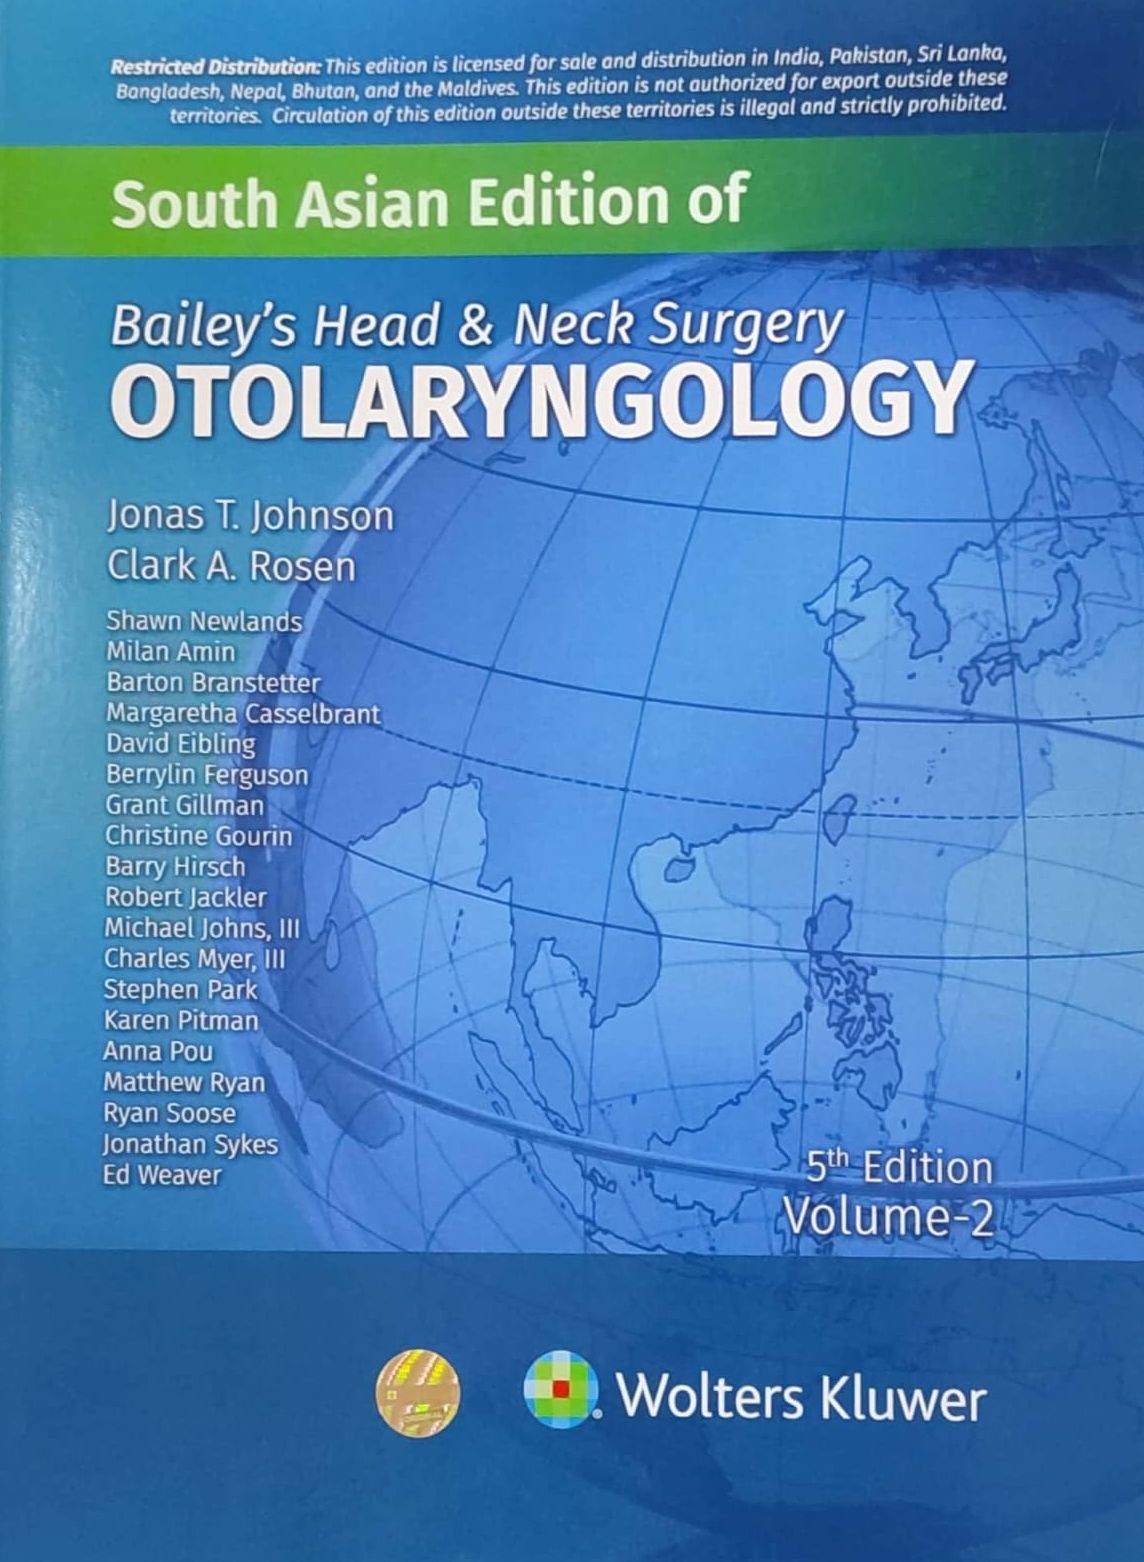 BAILEY'S HEAD AND NECK SURGERY, TWO VOLUME SET- ISBN: 9789395736053